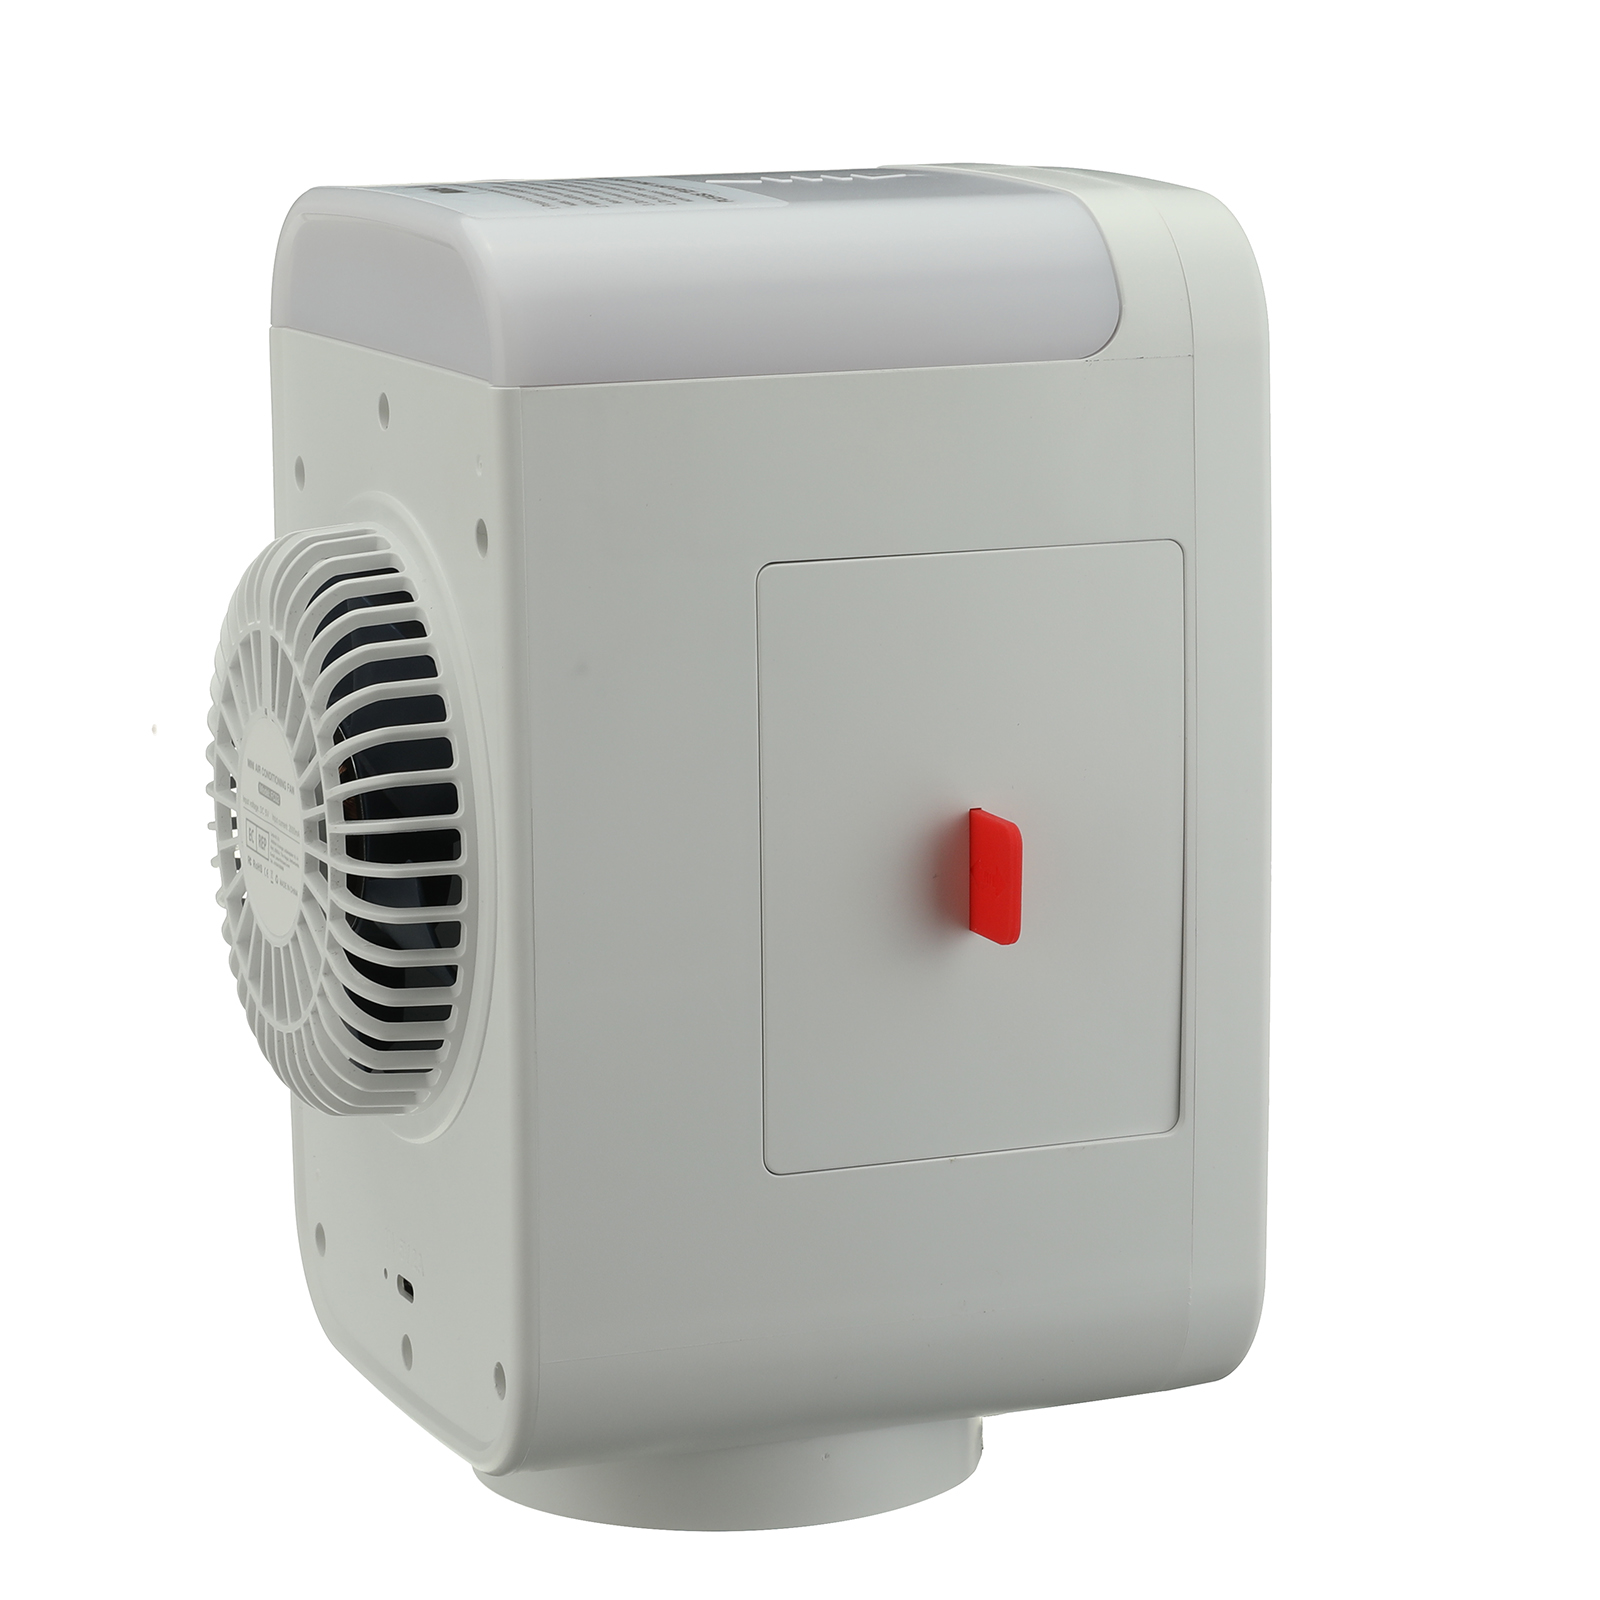 5-in-1-Mini-Air-Cooler-3-Wind-Speed-Adjustment-120deg-Wide-Angle-Rotation-Air-Humidification-Conditi-1885105-14